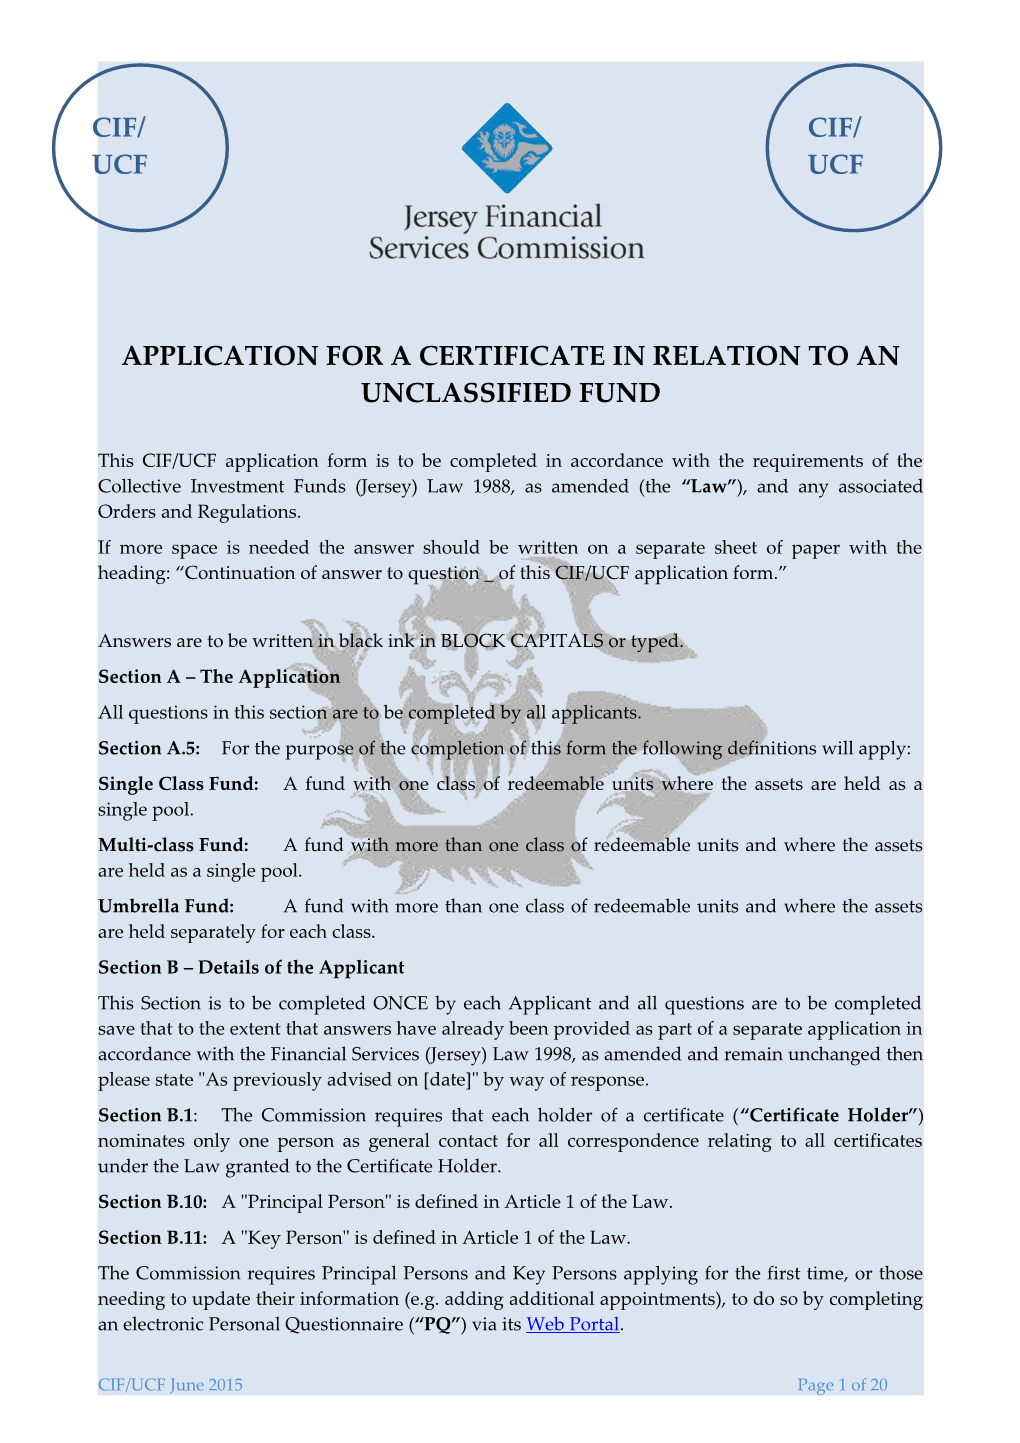 Application for a Certificate in Relation to an Unclassified Fund